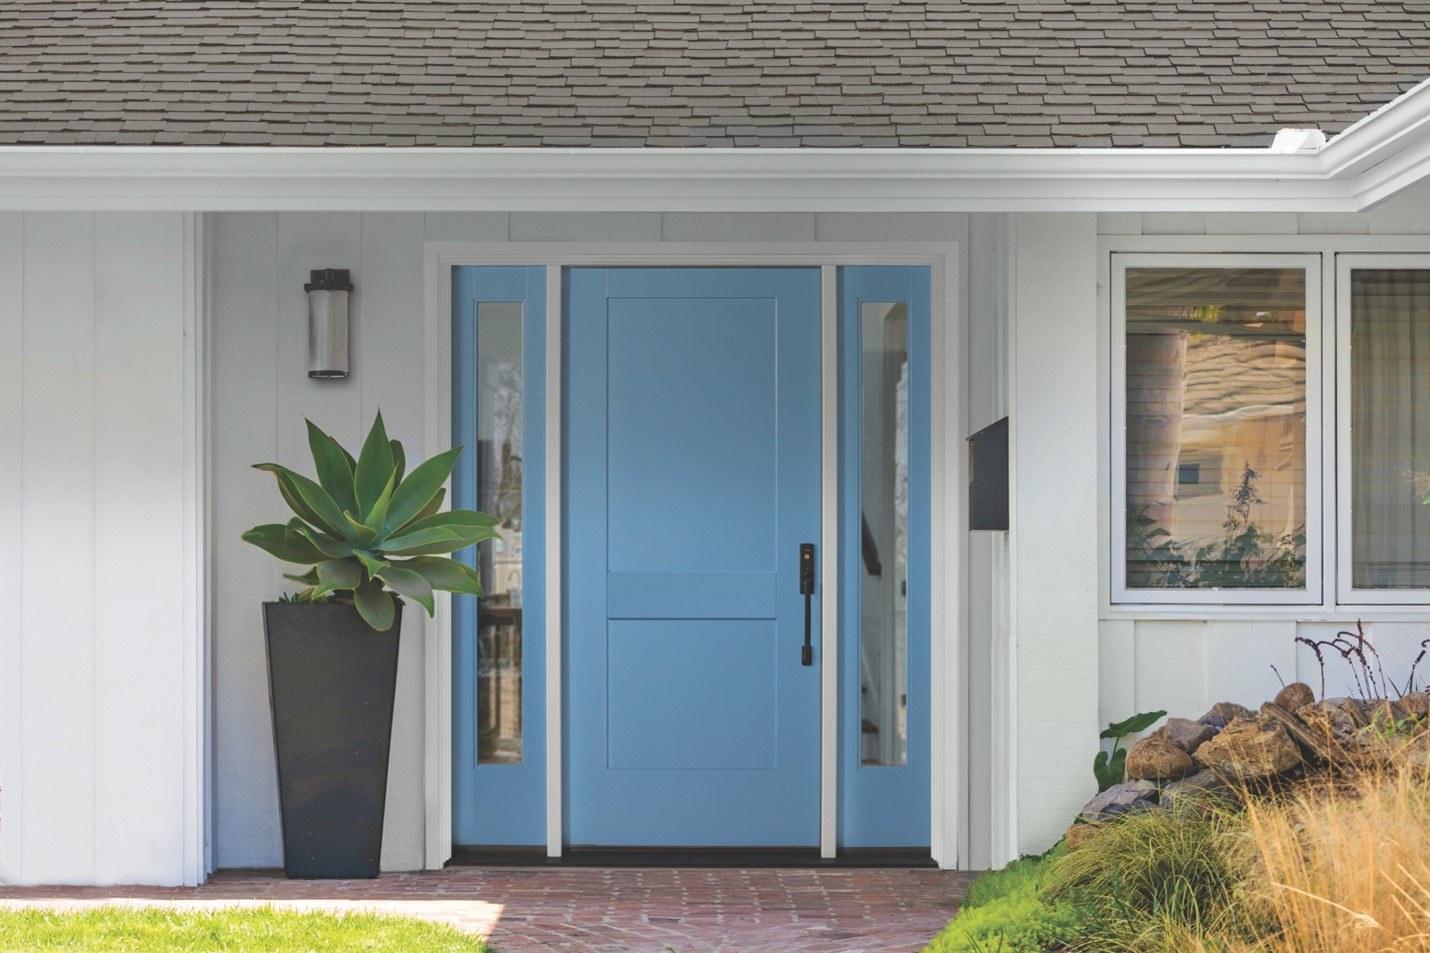 A light blue energy-efficient exterior door flanked by sidelites on a white house